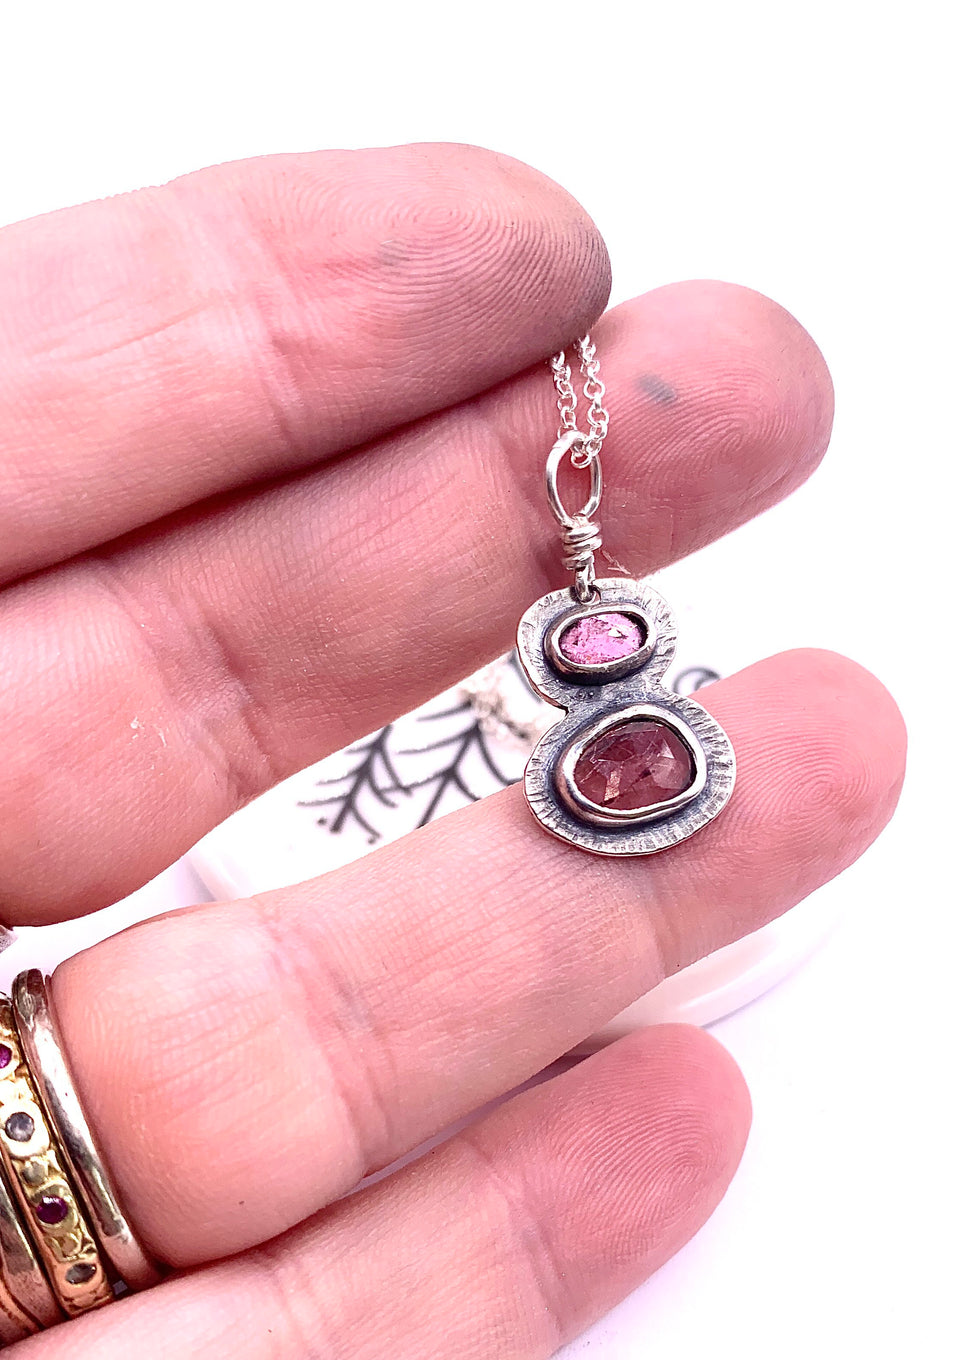 Northern Fells Wainwrights Pendant and Earring Set with :Pink Tourmaline